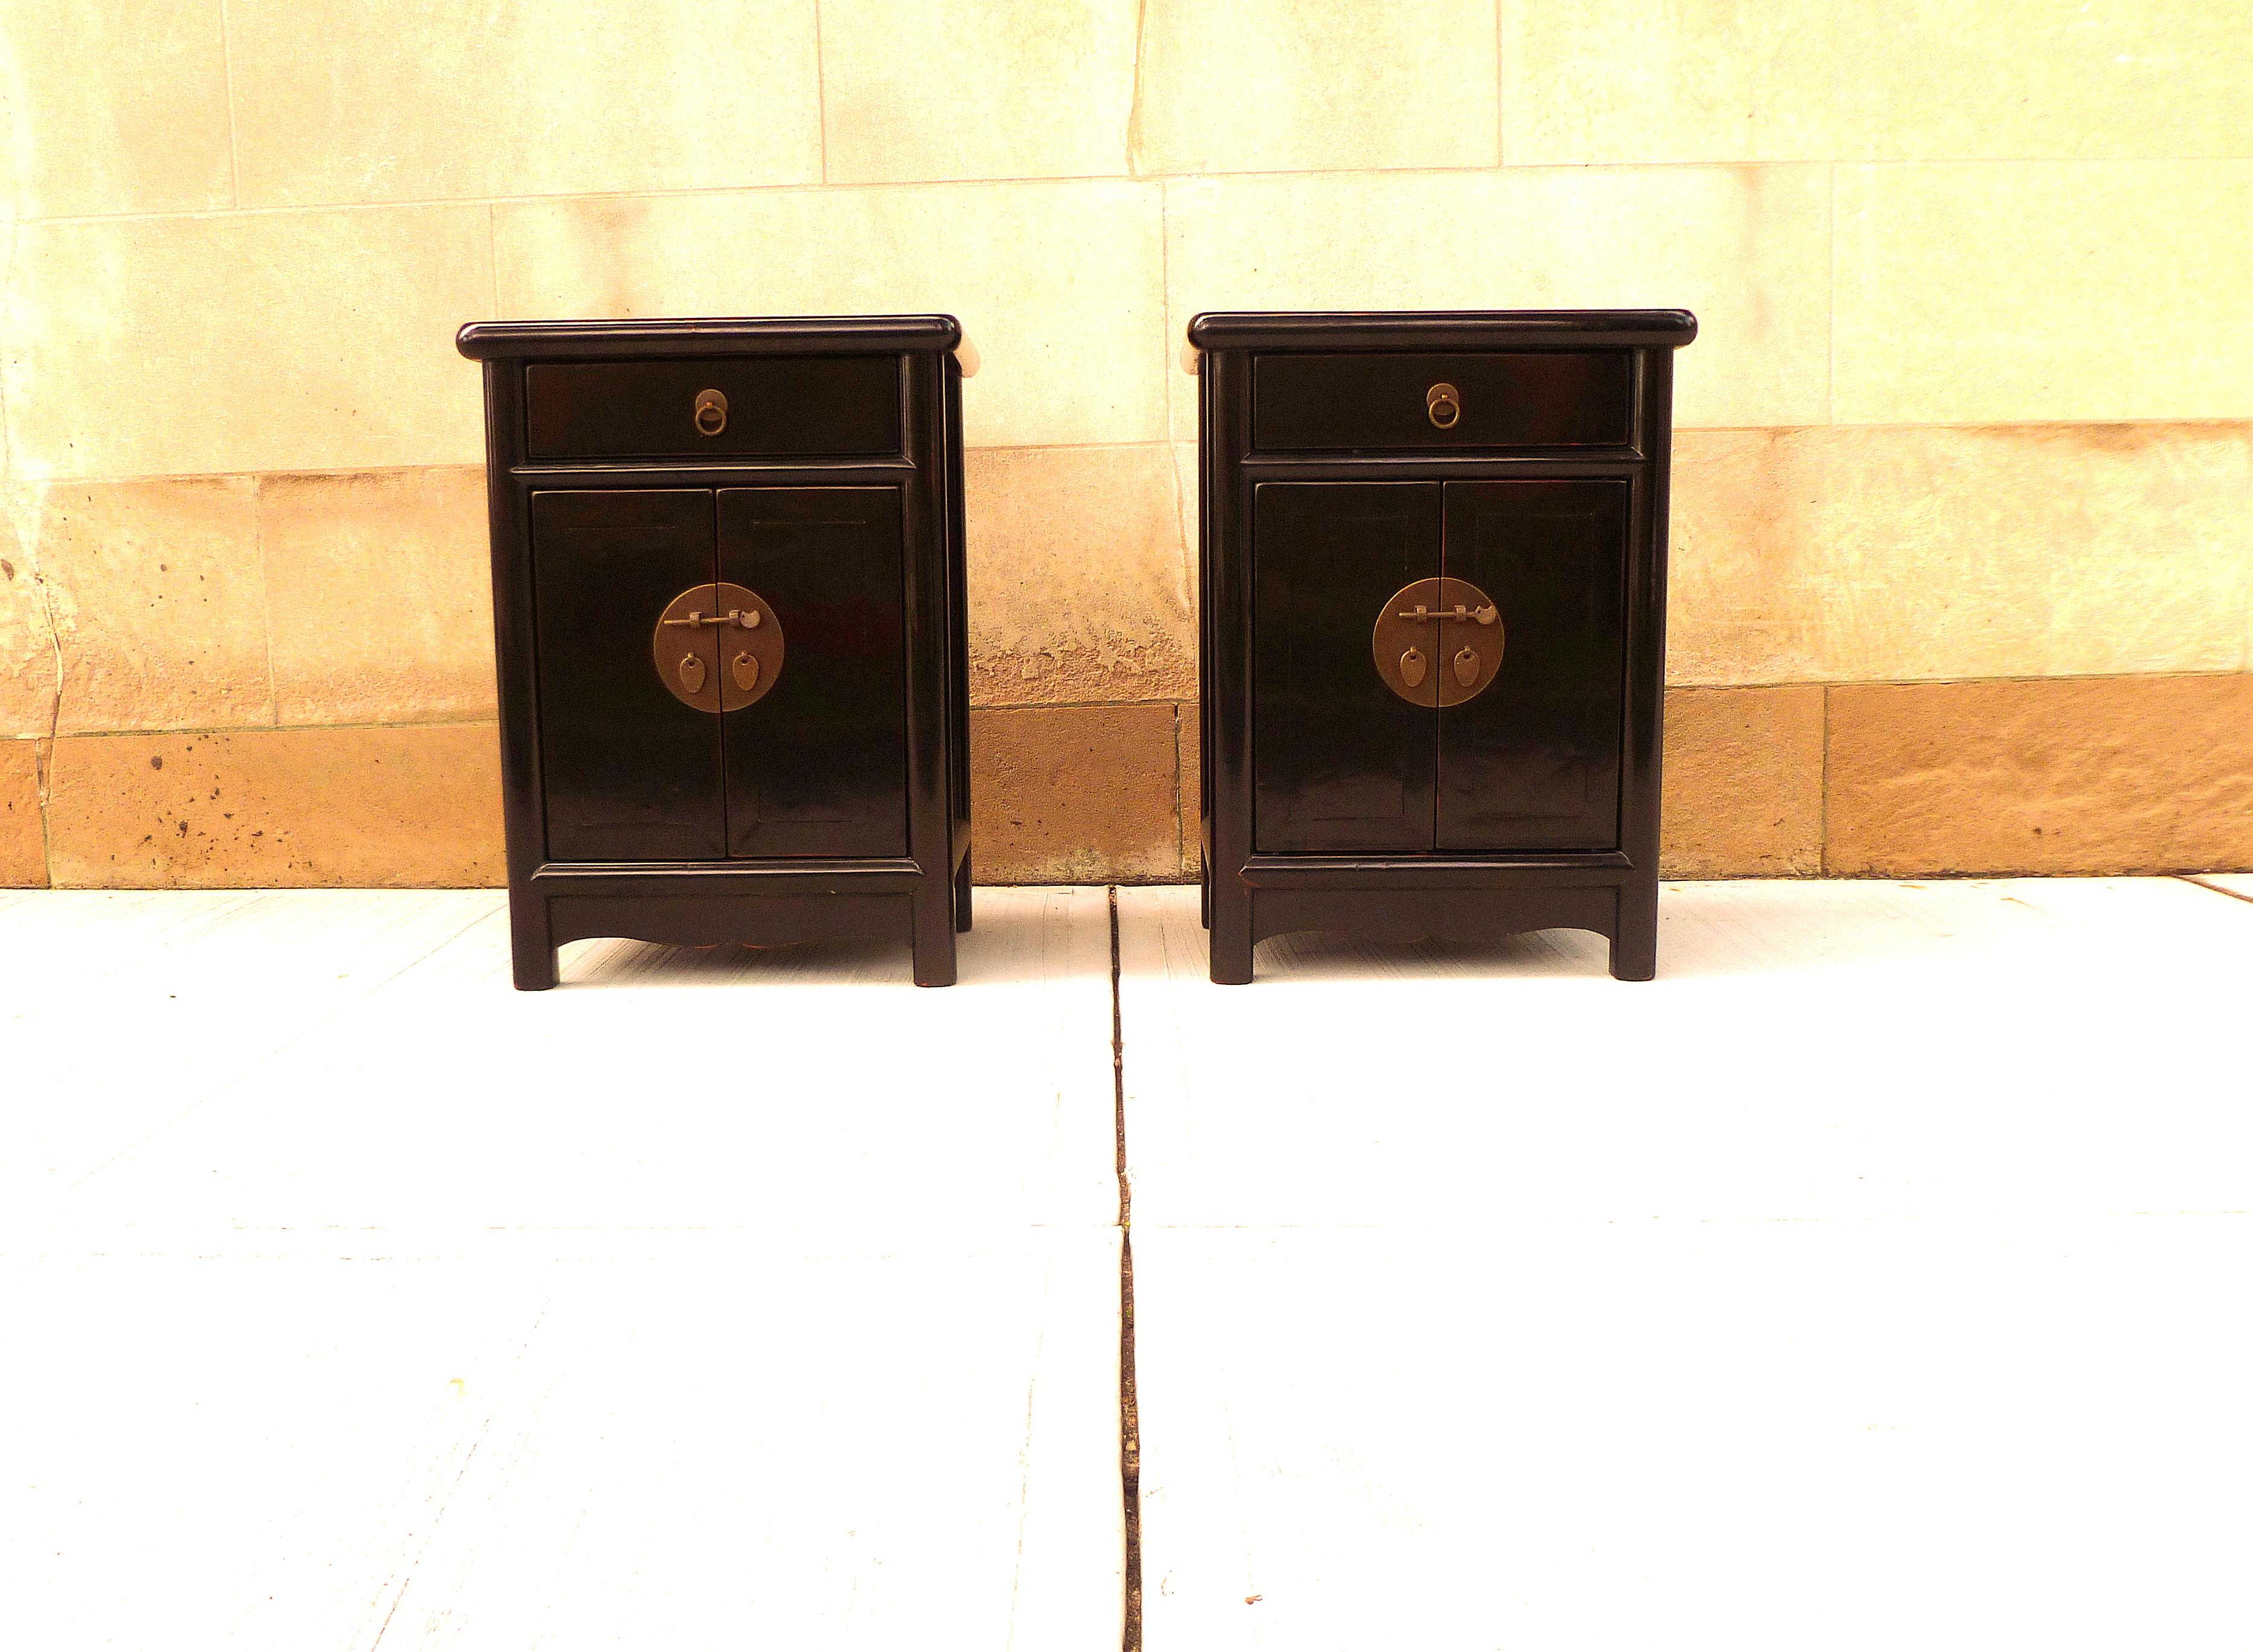 Pair of fine black lacquer chests, each chest with single drawer and a pair of open doors. Simple and elegant. Beautiful color and form. We carry fine quality furniture with elegant finished and has been appeared many times in 